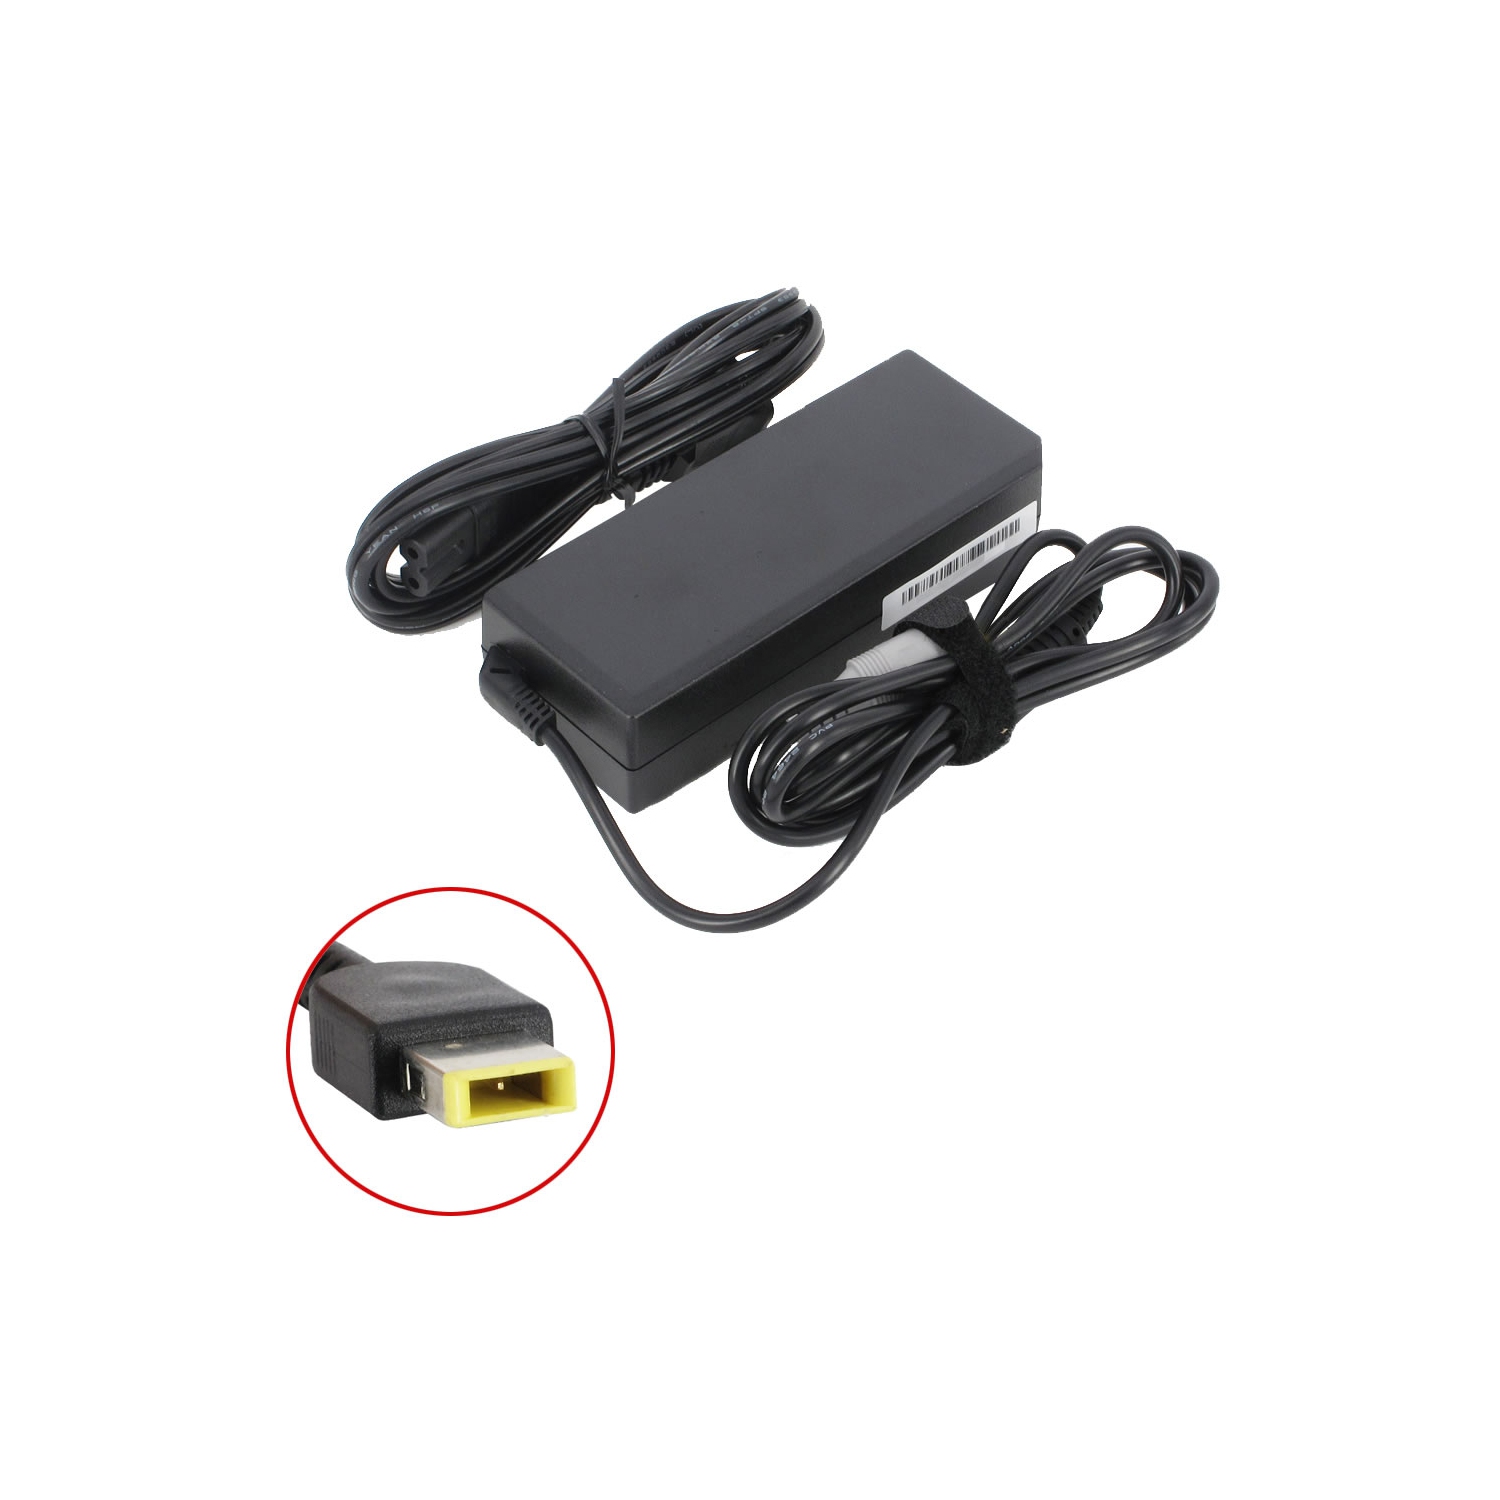 Brand New Laptop AC Adapter for Lenovo Ideapad 300-14ISK 80Q6002MCF, 0B47455, 45N0247, ADLX45NDC3A, ADLX65NLC3A, 36200235